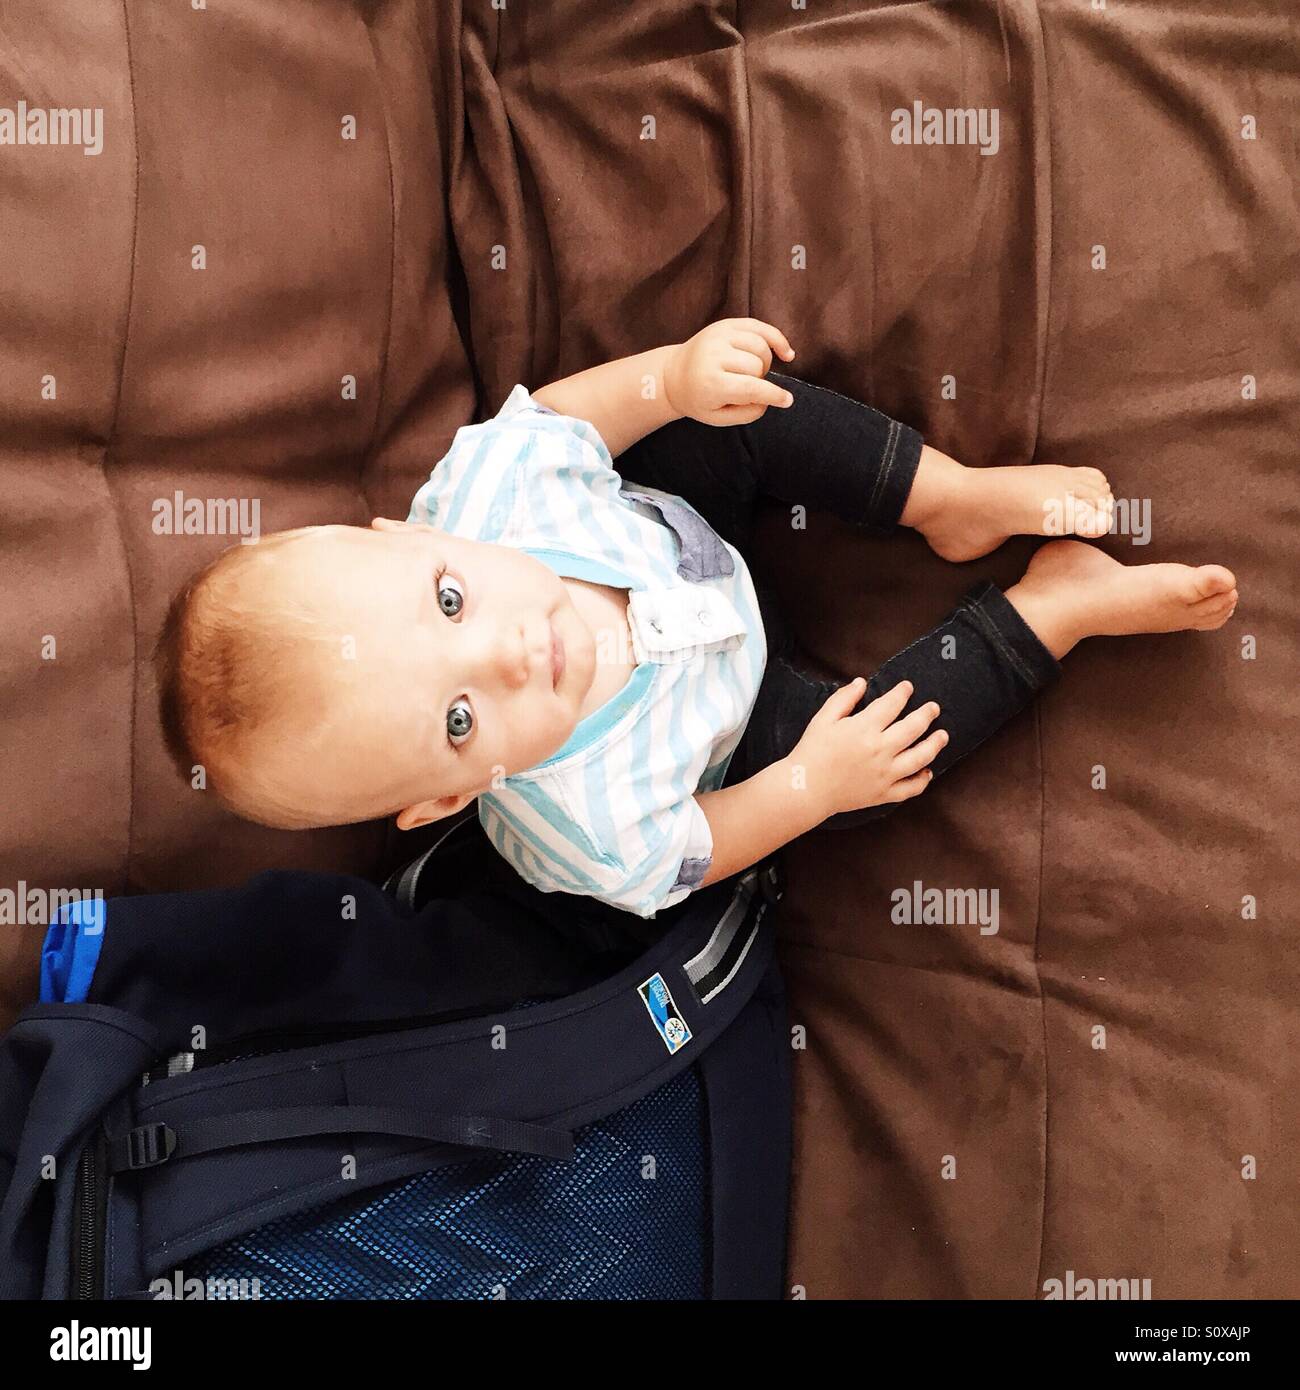 Little baby boy sitting on the couch Banque D'Images